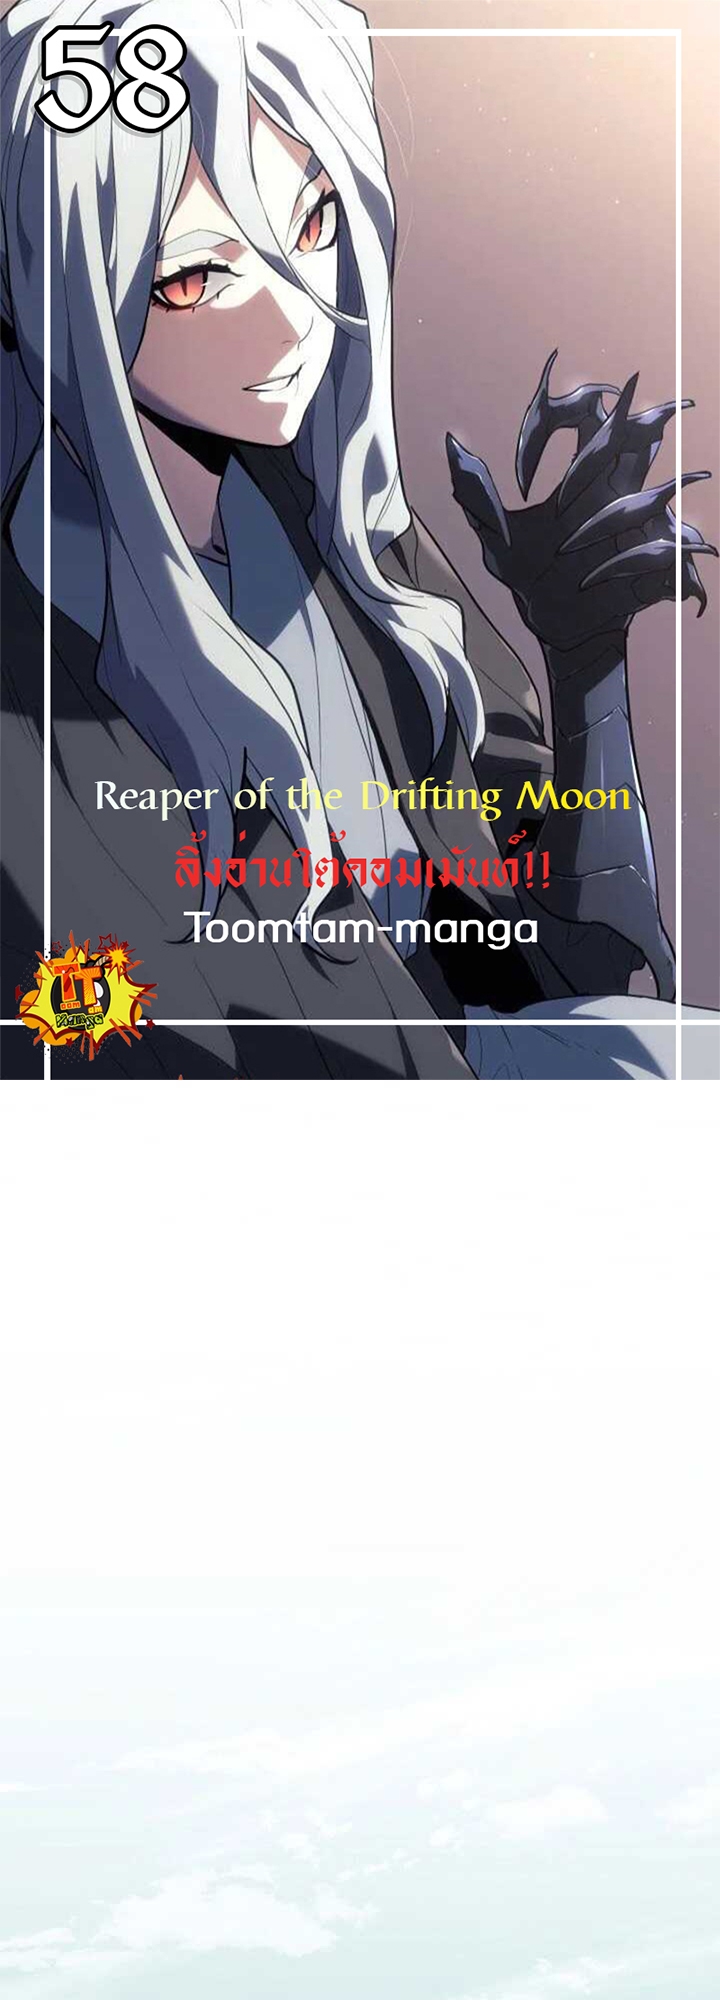 Reaper of the Drifting Moon 58 18 10 660001